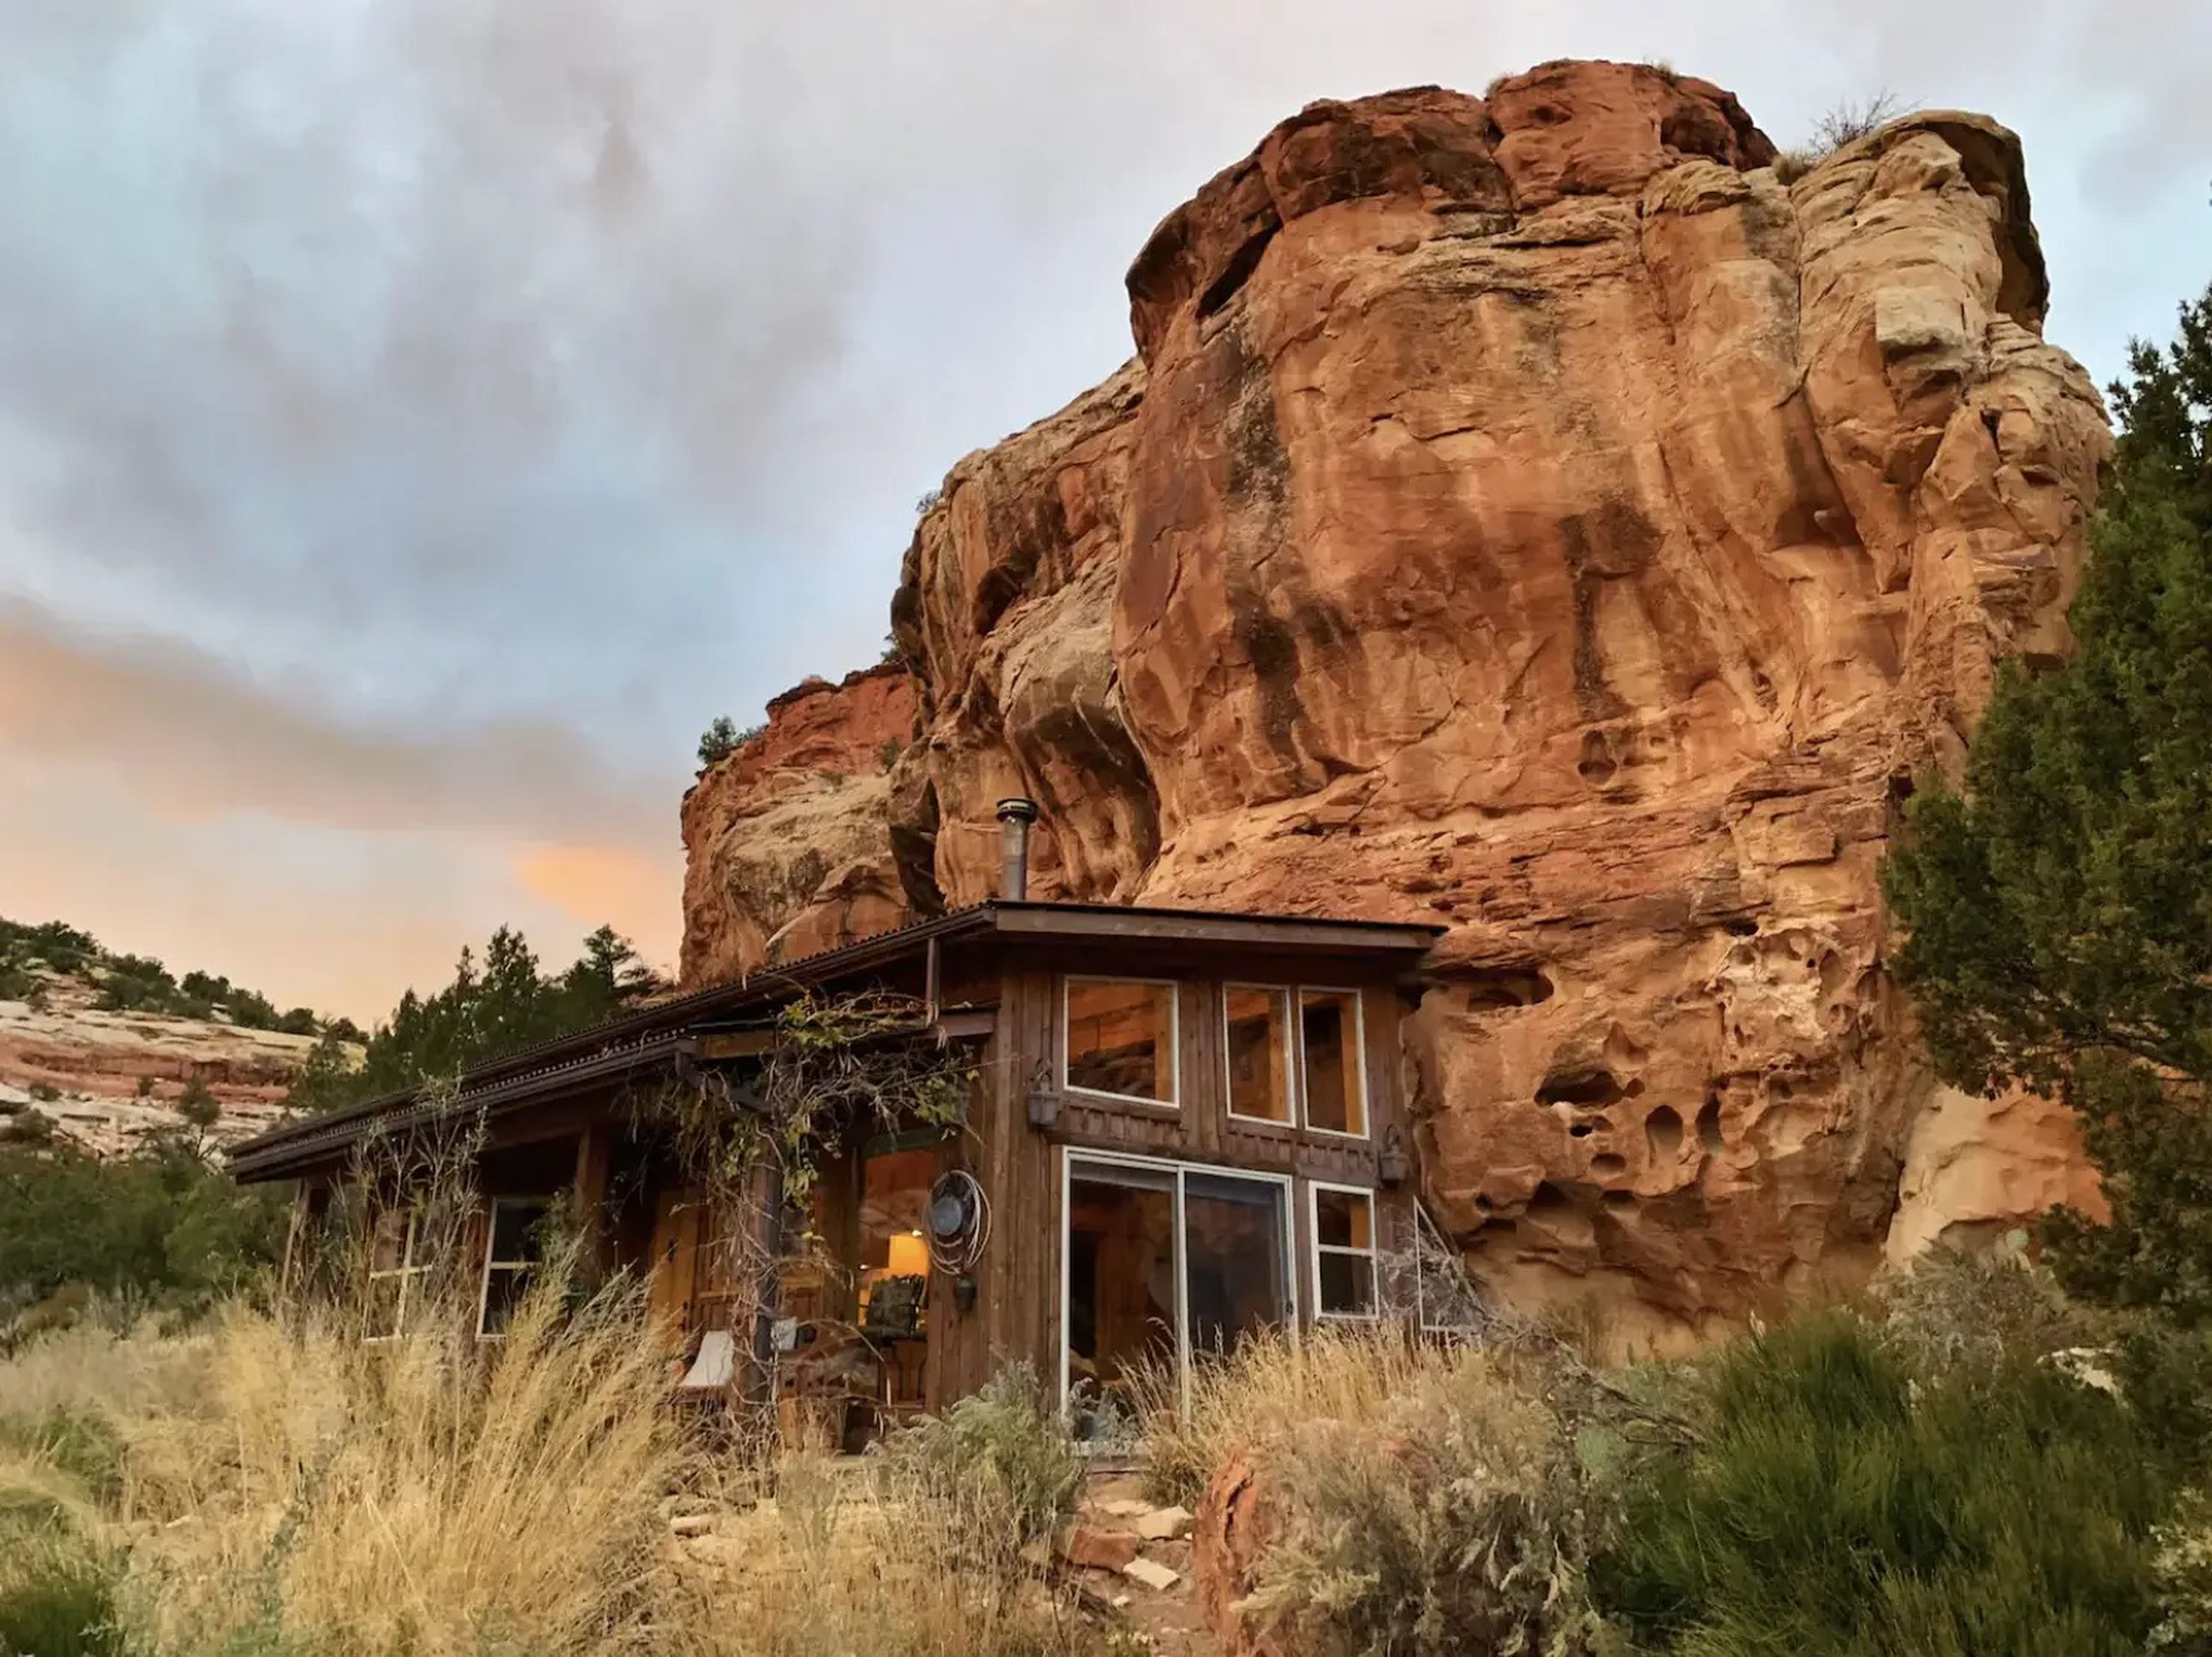 A view of the troglodyte home in Colorado.